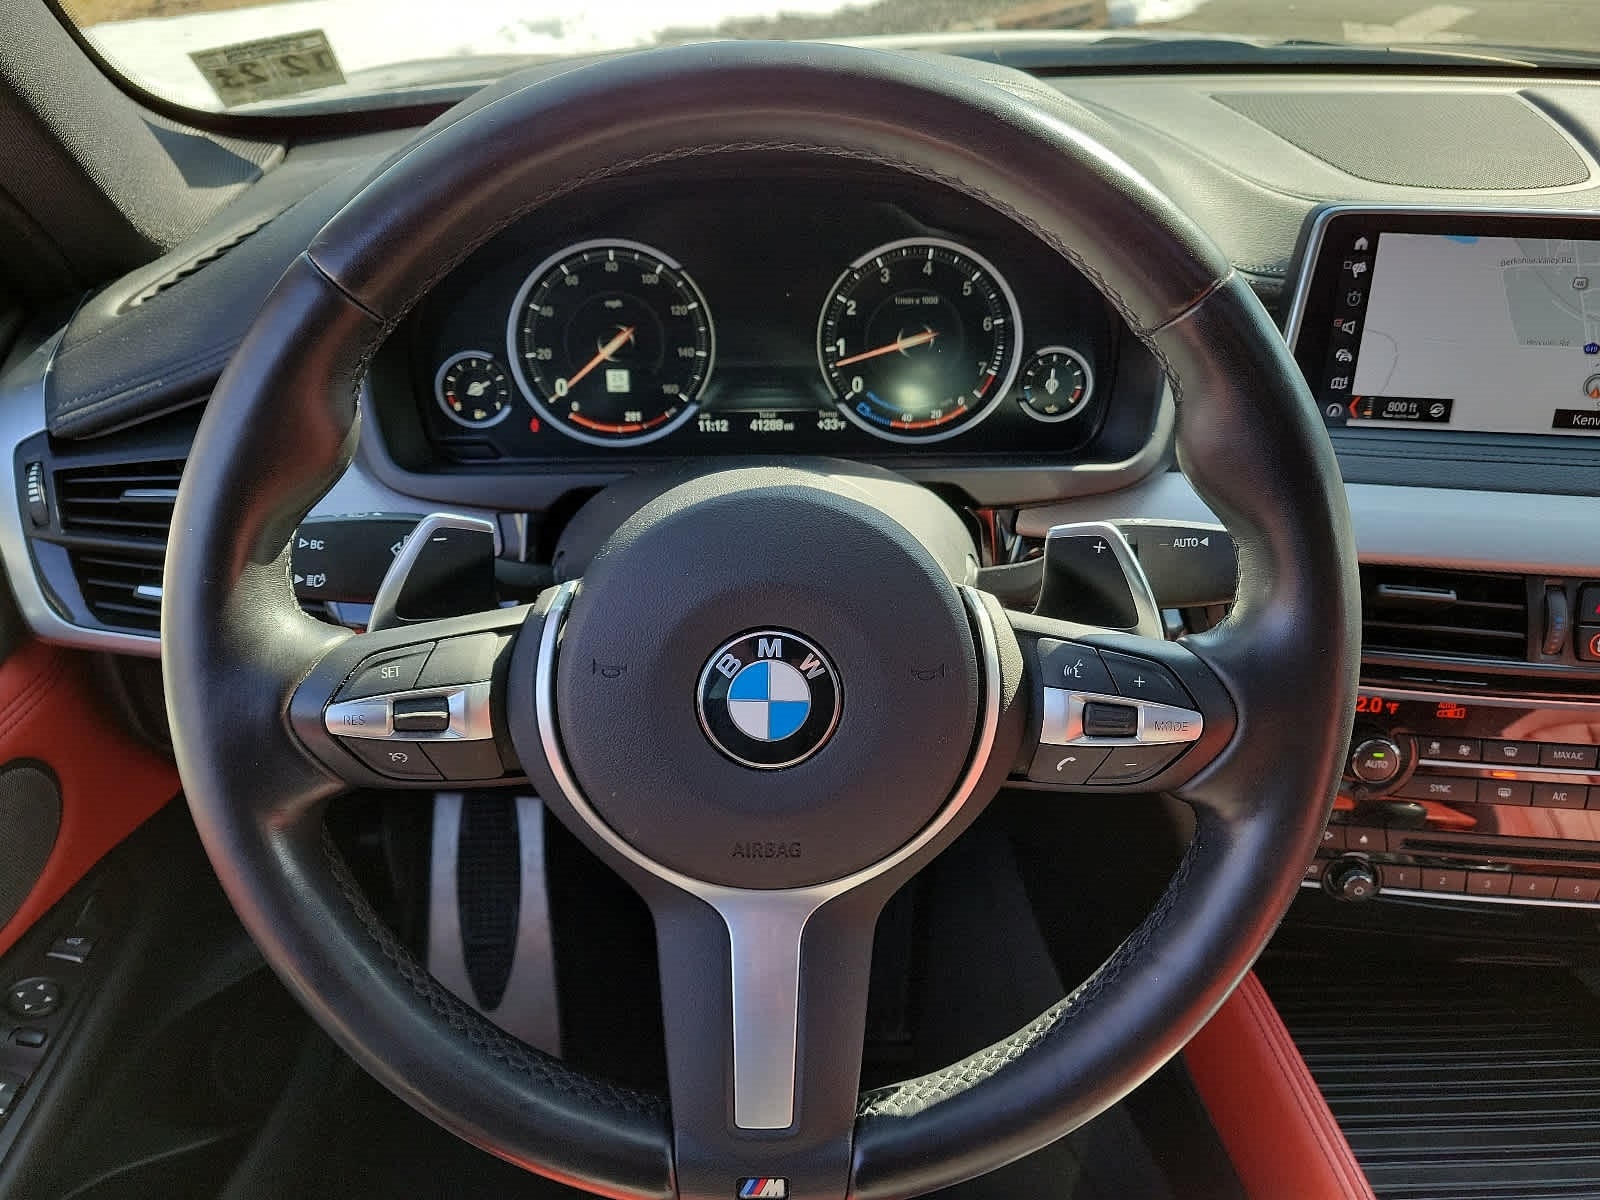 2019 BMW X6 xDrive50i Sports Activity Coupe